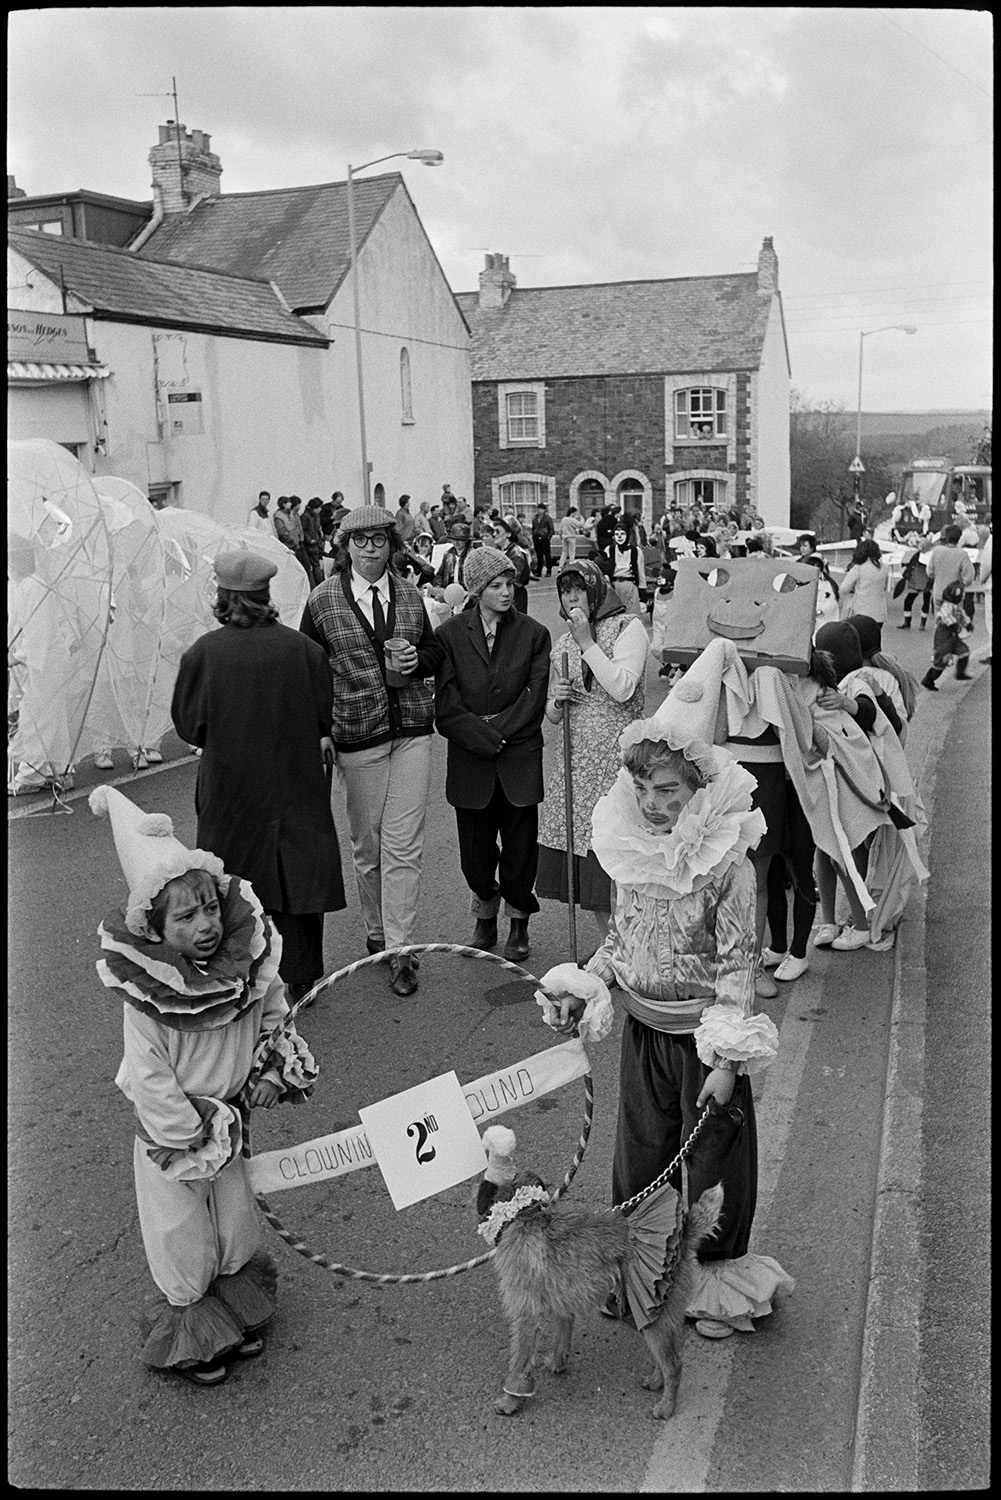 May Fair. Fancy dress parade, decorated bicycles, floats, old bicycles, penny farthing. 
[Two children dressed as clowns with a dog at Torrington May Fair parade. They are holding a hula hoop between them with a sign reading 'Clowning Around'. Other people at the May Fair, some in fancy dress, can be seen in the background.]